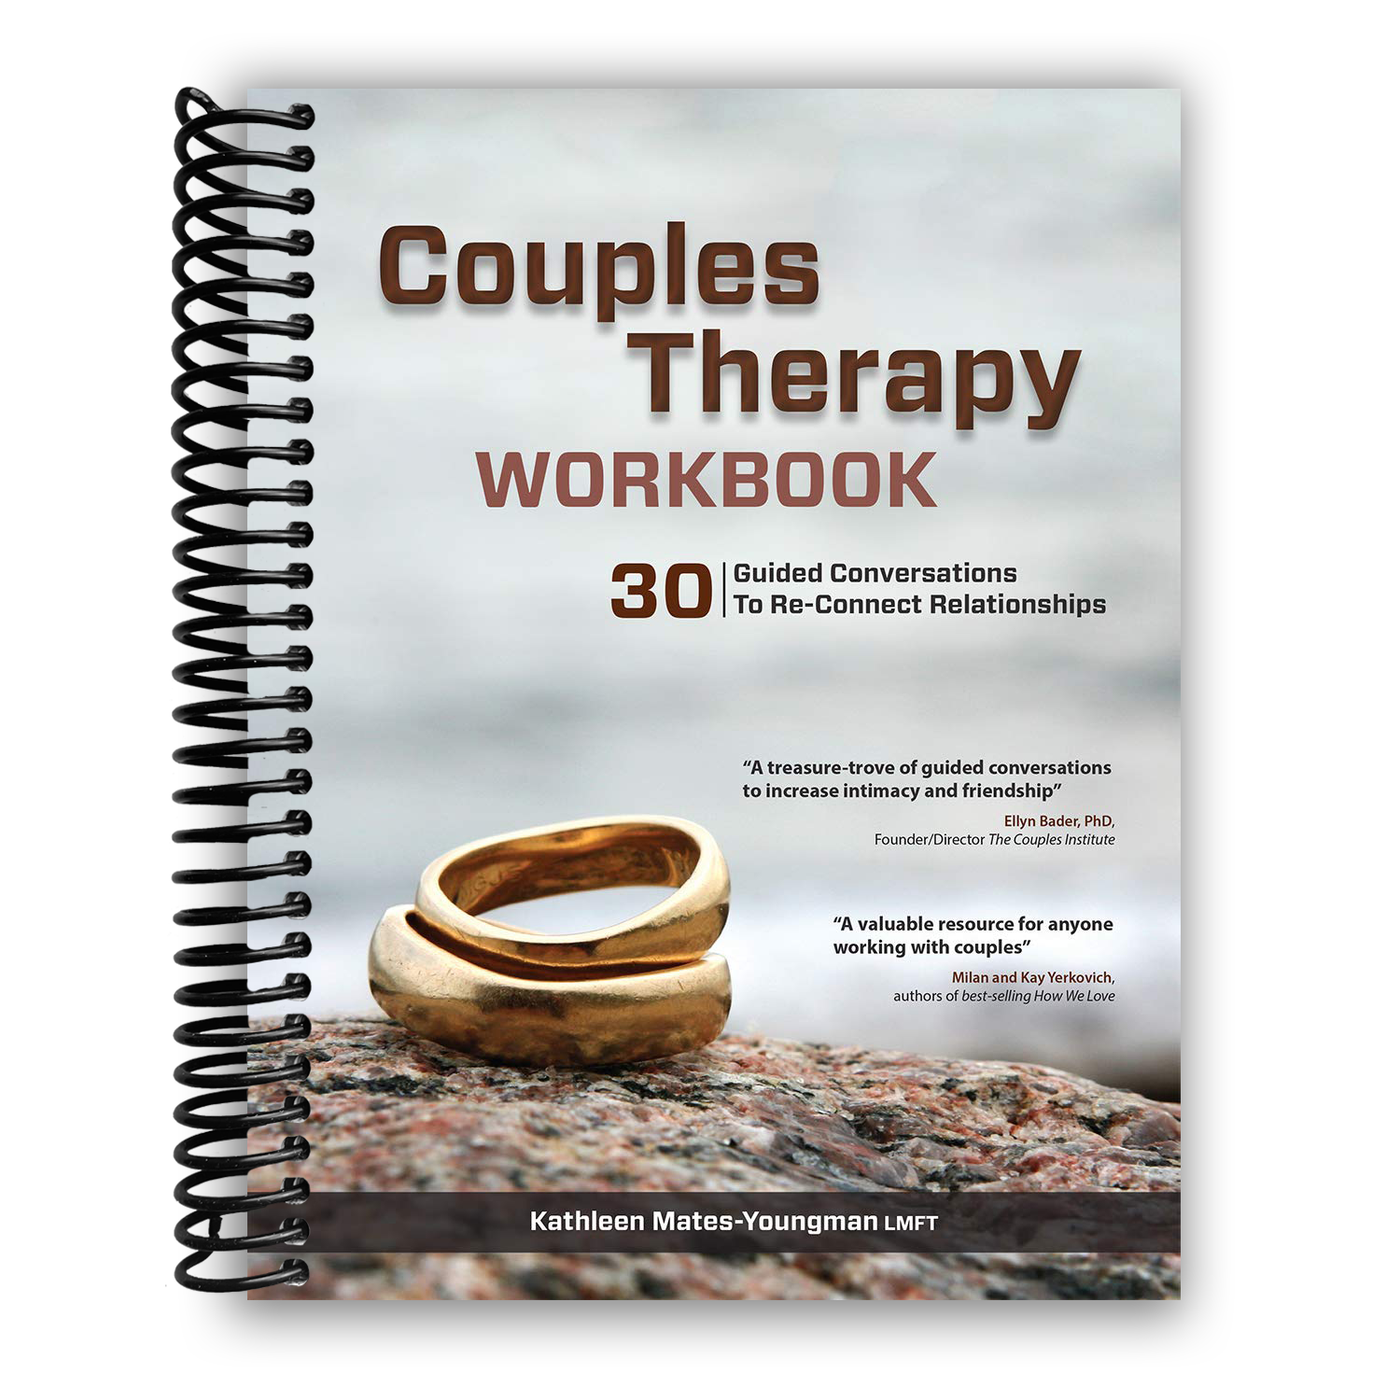 Couples Therapy Workbook: 30 Guided Conversations to Re-Connect Relationships(Spiral Bound)